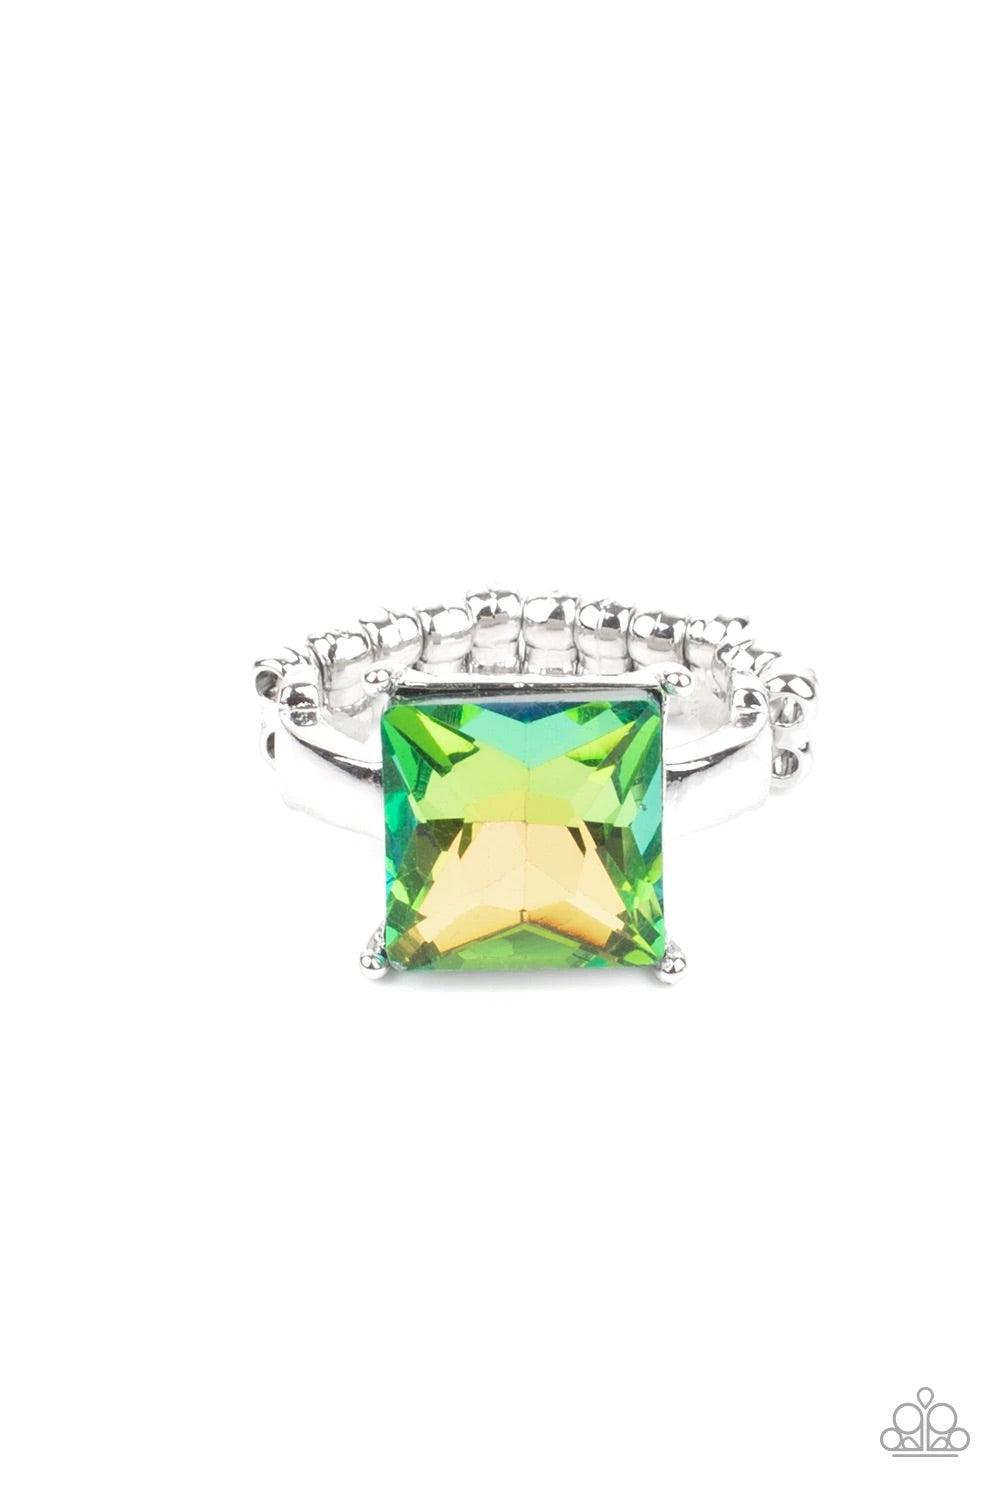 Paparazzi Accessories Ready For My Coronation- Green Featuring a stellar UV shimmer, an oversized princess cut rhinestone shines brilliantly atop a dainty silver band for a sparkly finish. Features a dainty stretchy band for a flexible fit. Sold as one in